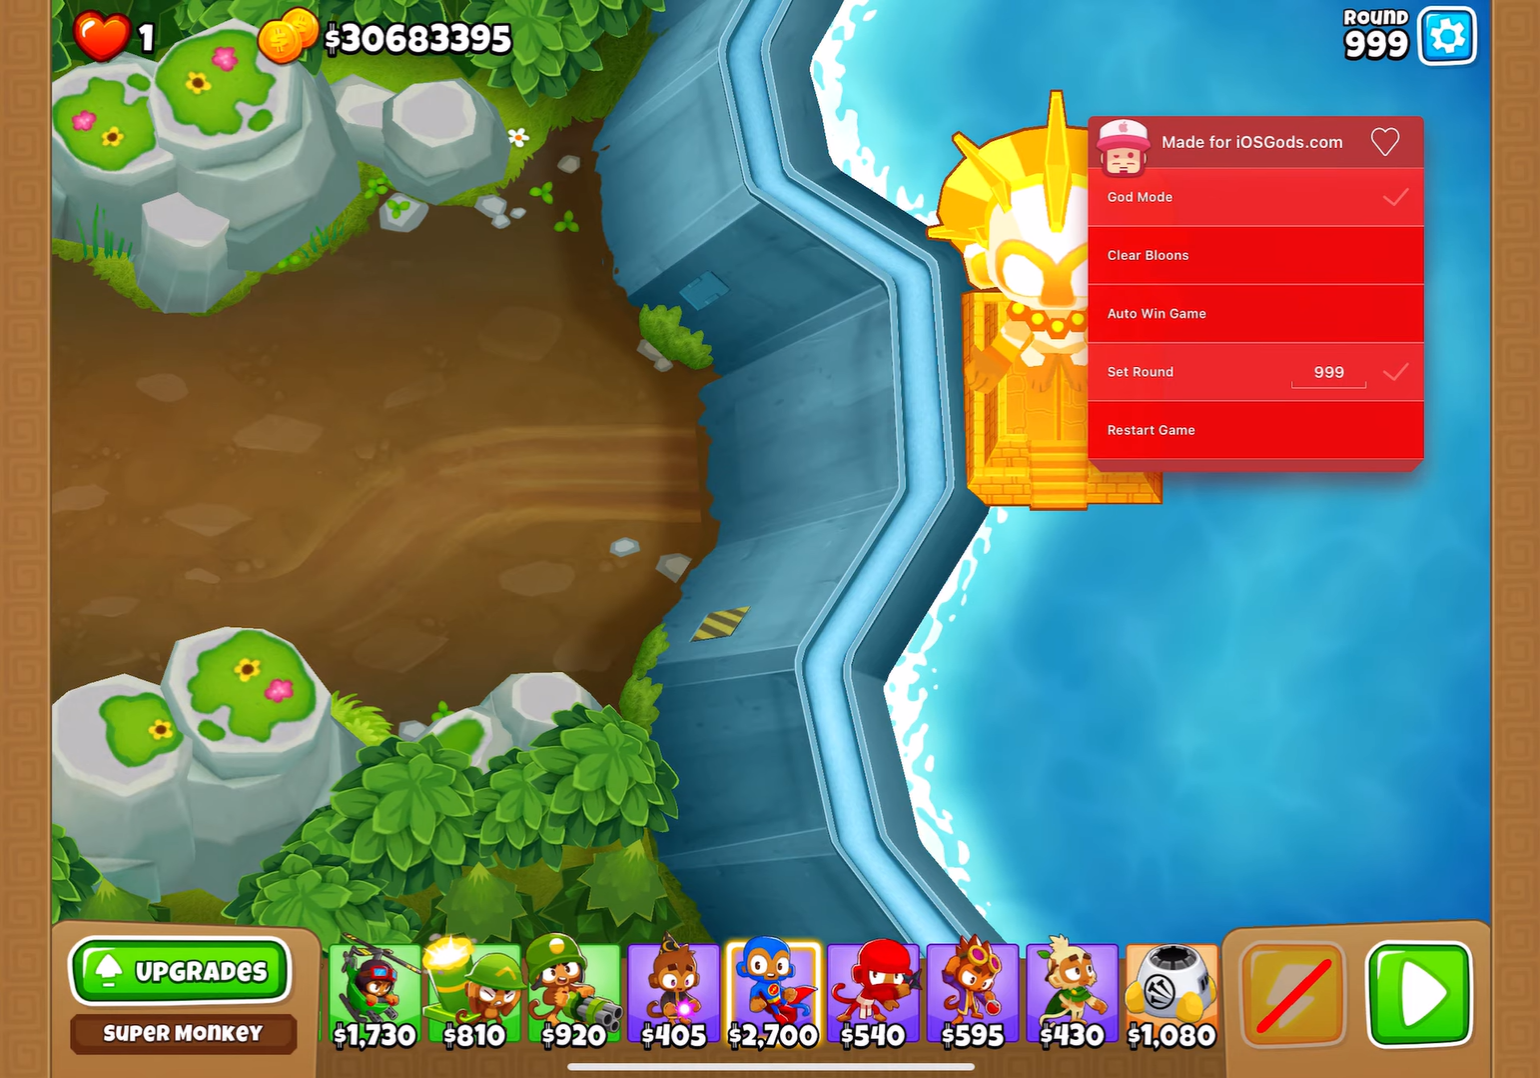 God Mode Hack in Bloons TD 6 for iPhone